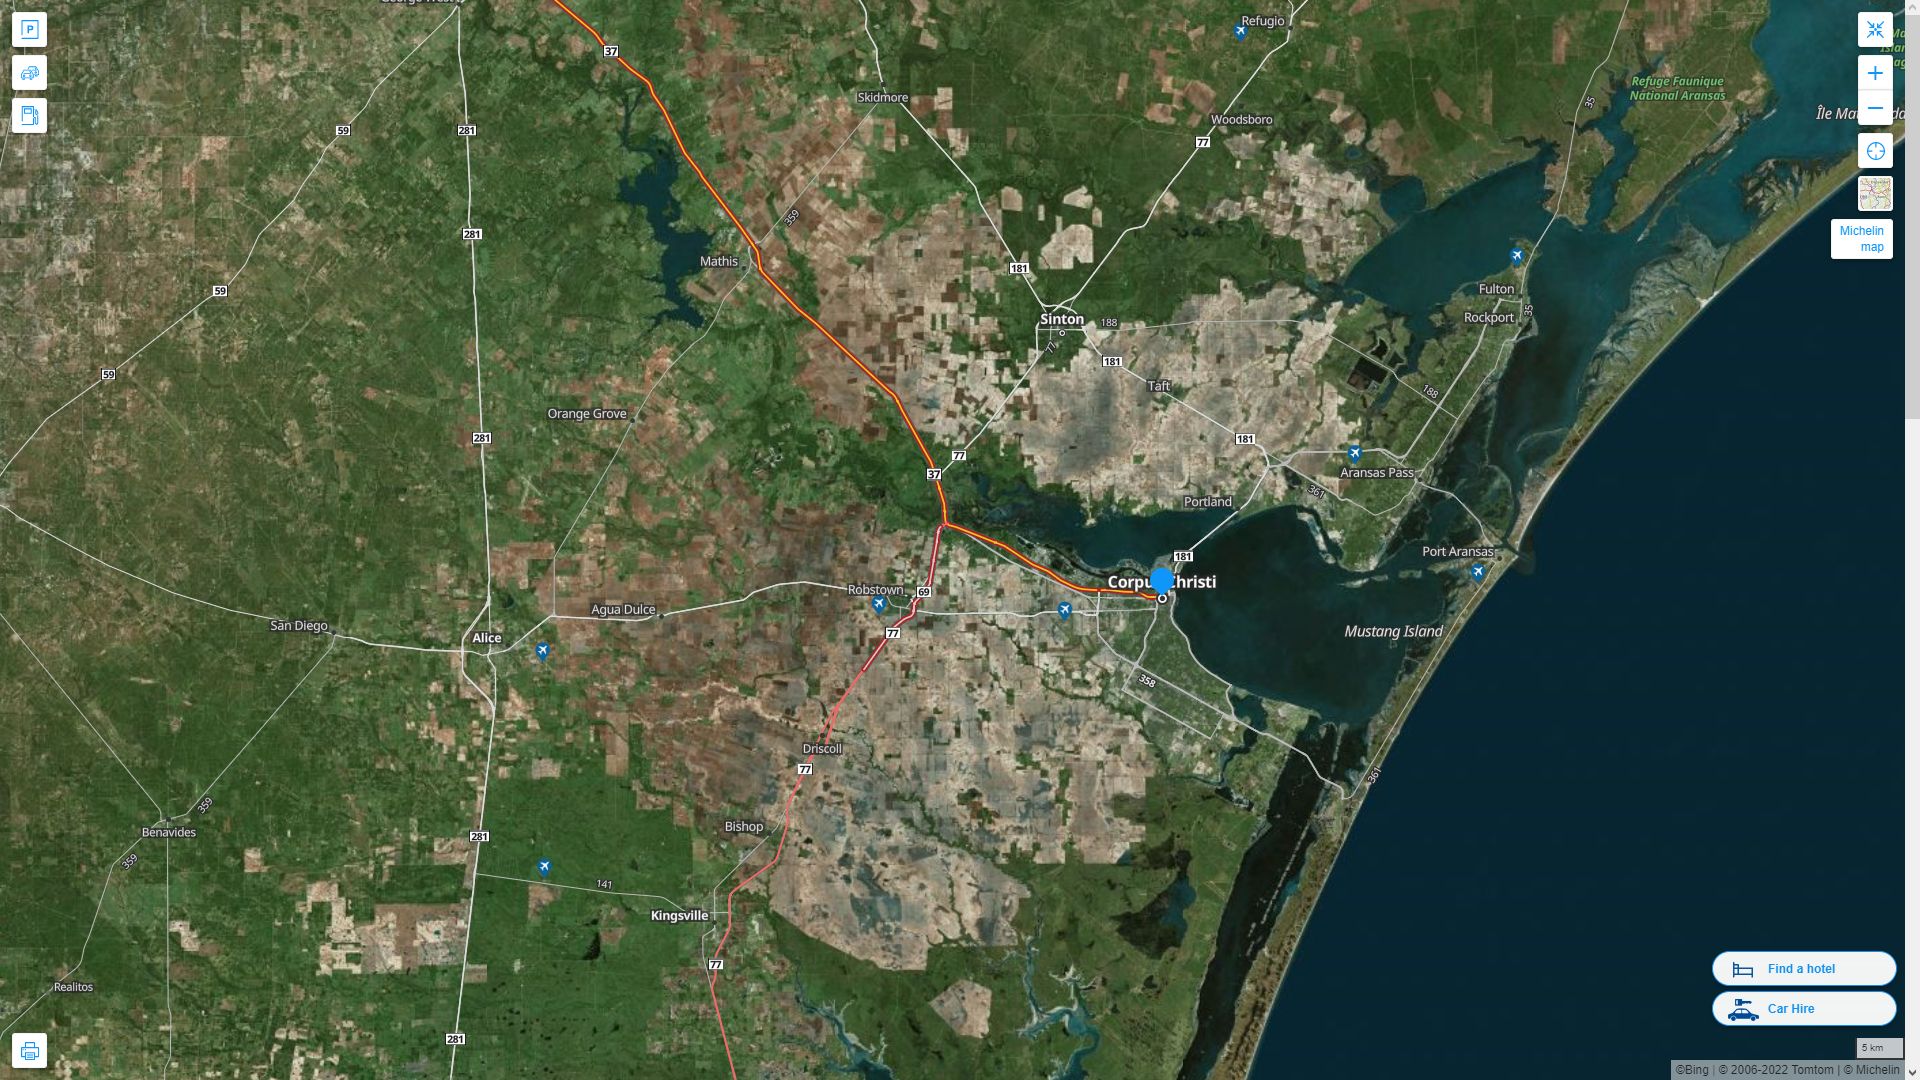 Corpus Christi Texas Highway and Road Map with Satellite View